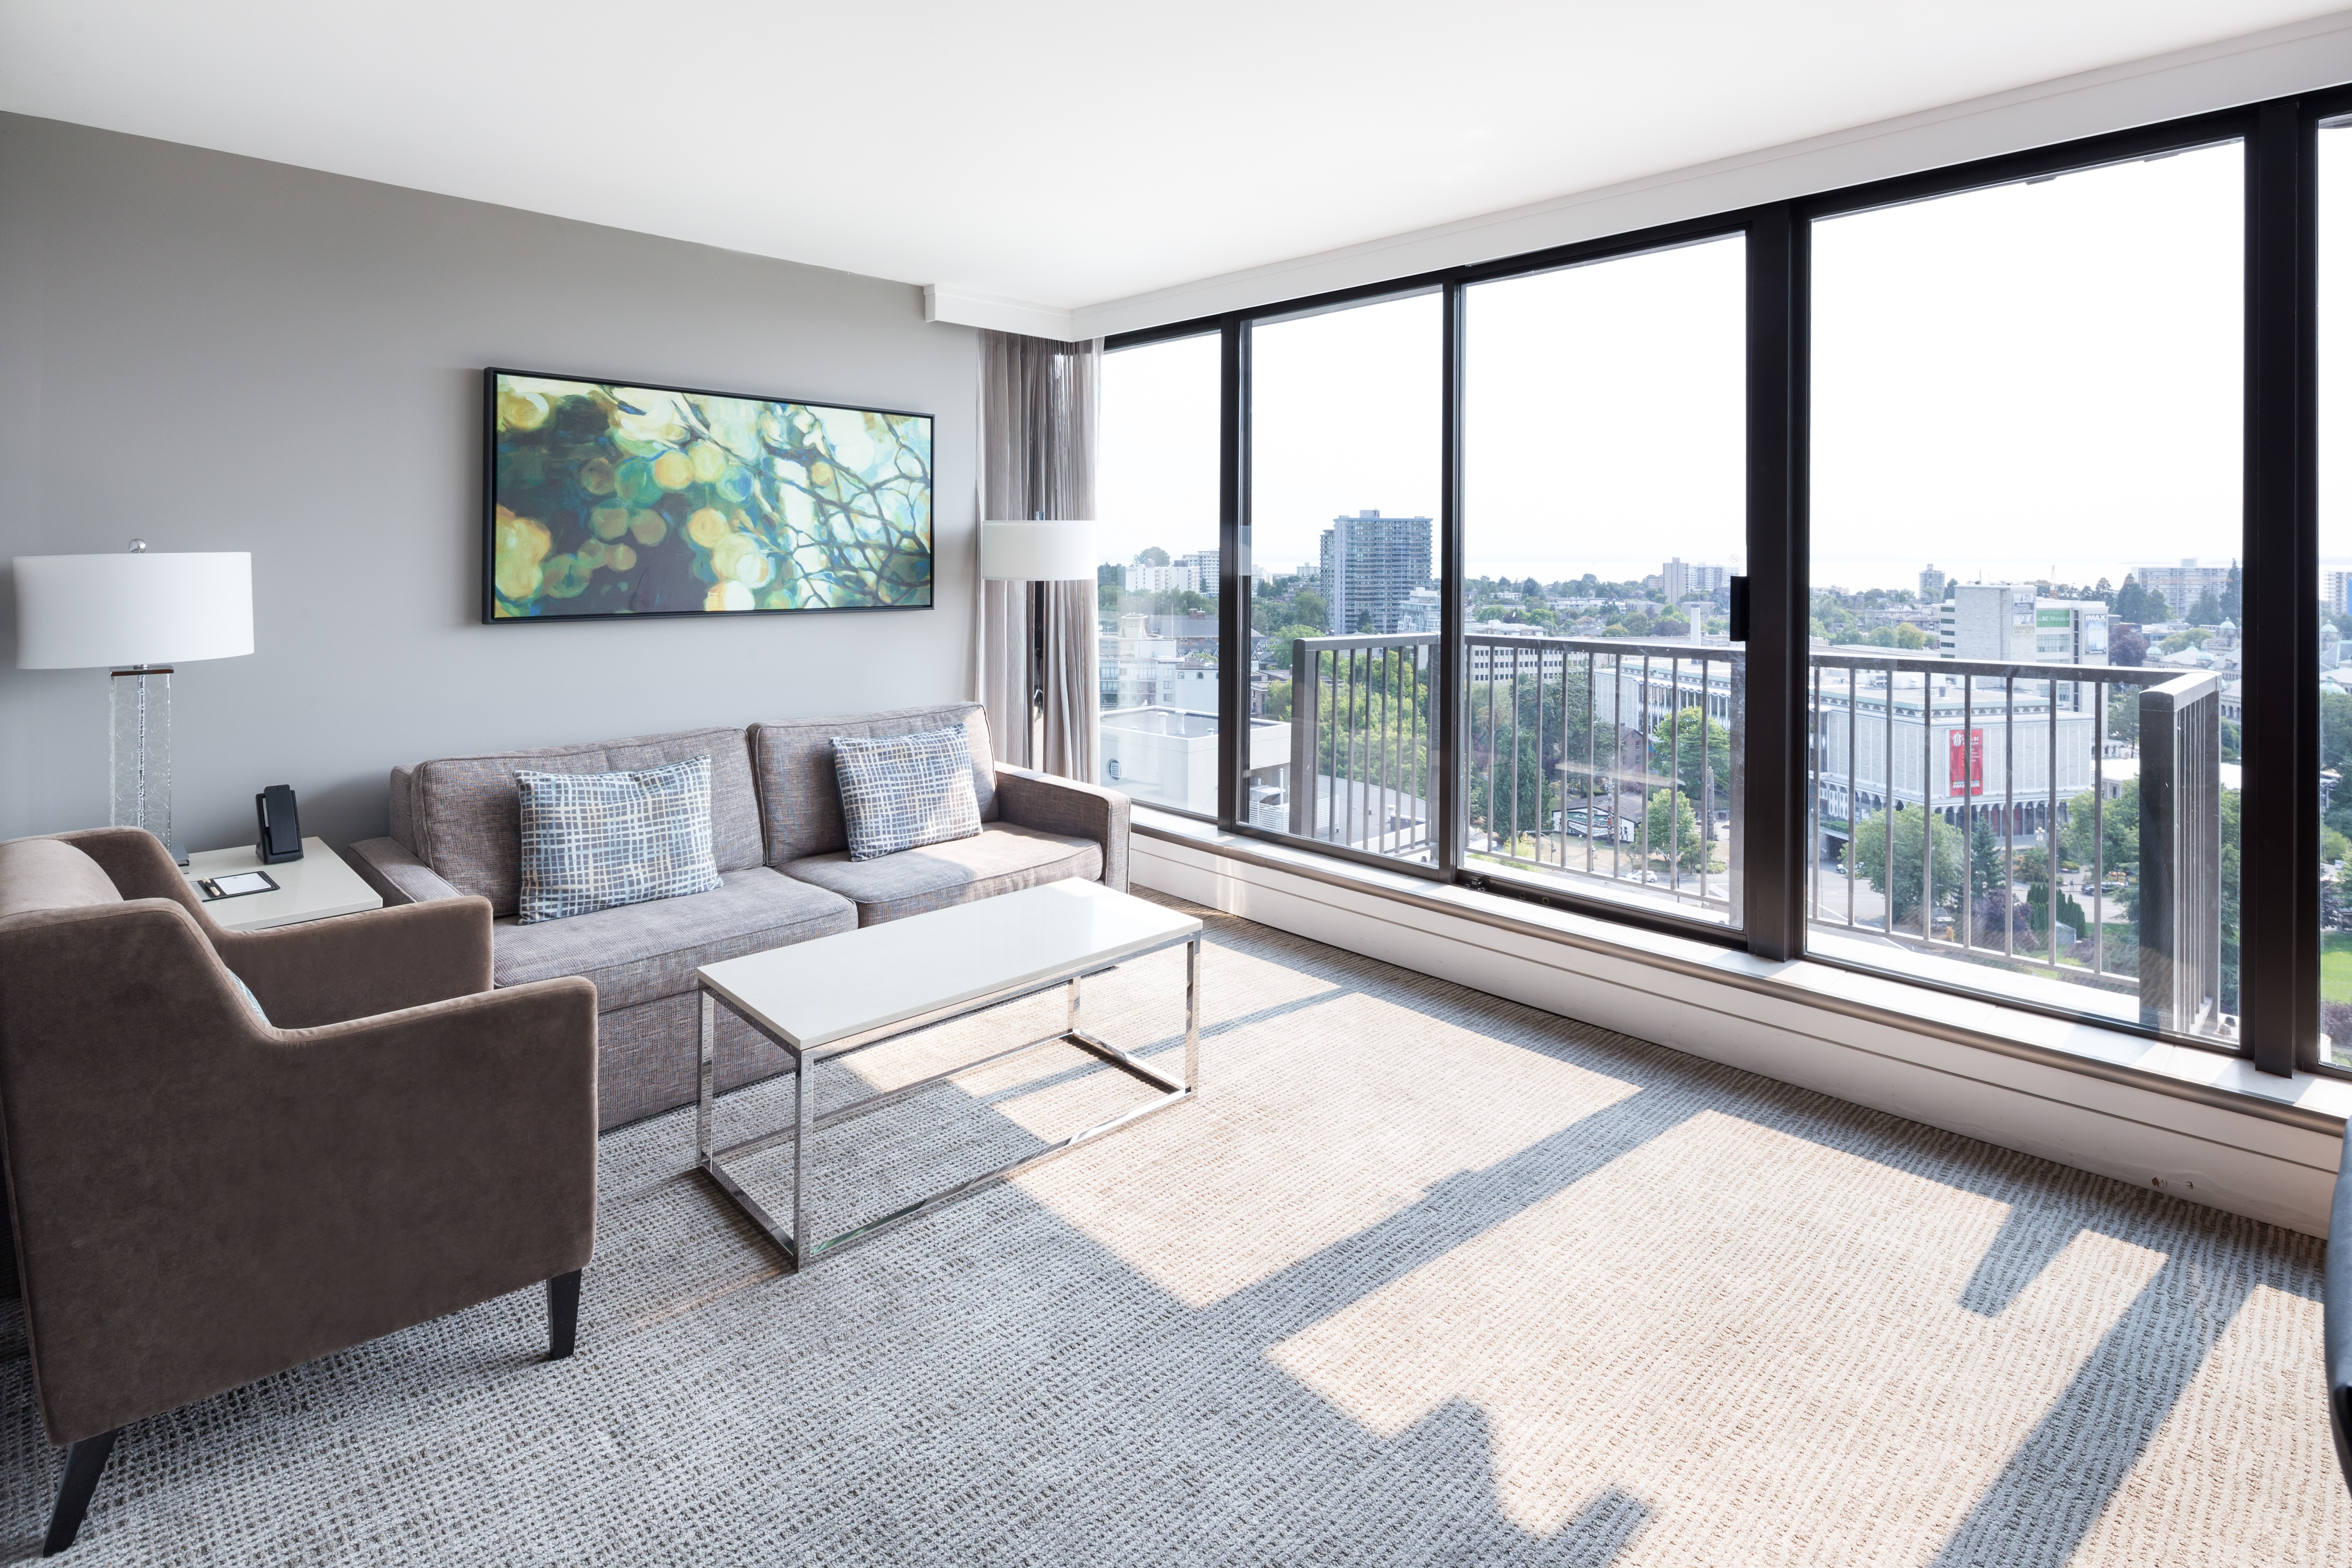  Living Room Suite Area With Sofa, Chair, Table, Floor Lamps and Floor to Ceiling Balcony Windows that Overlook the City